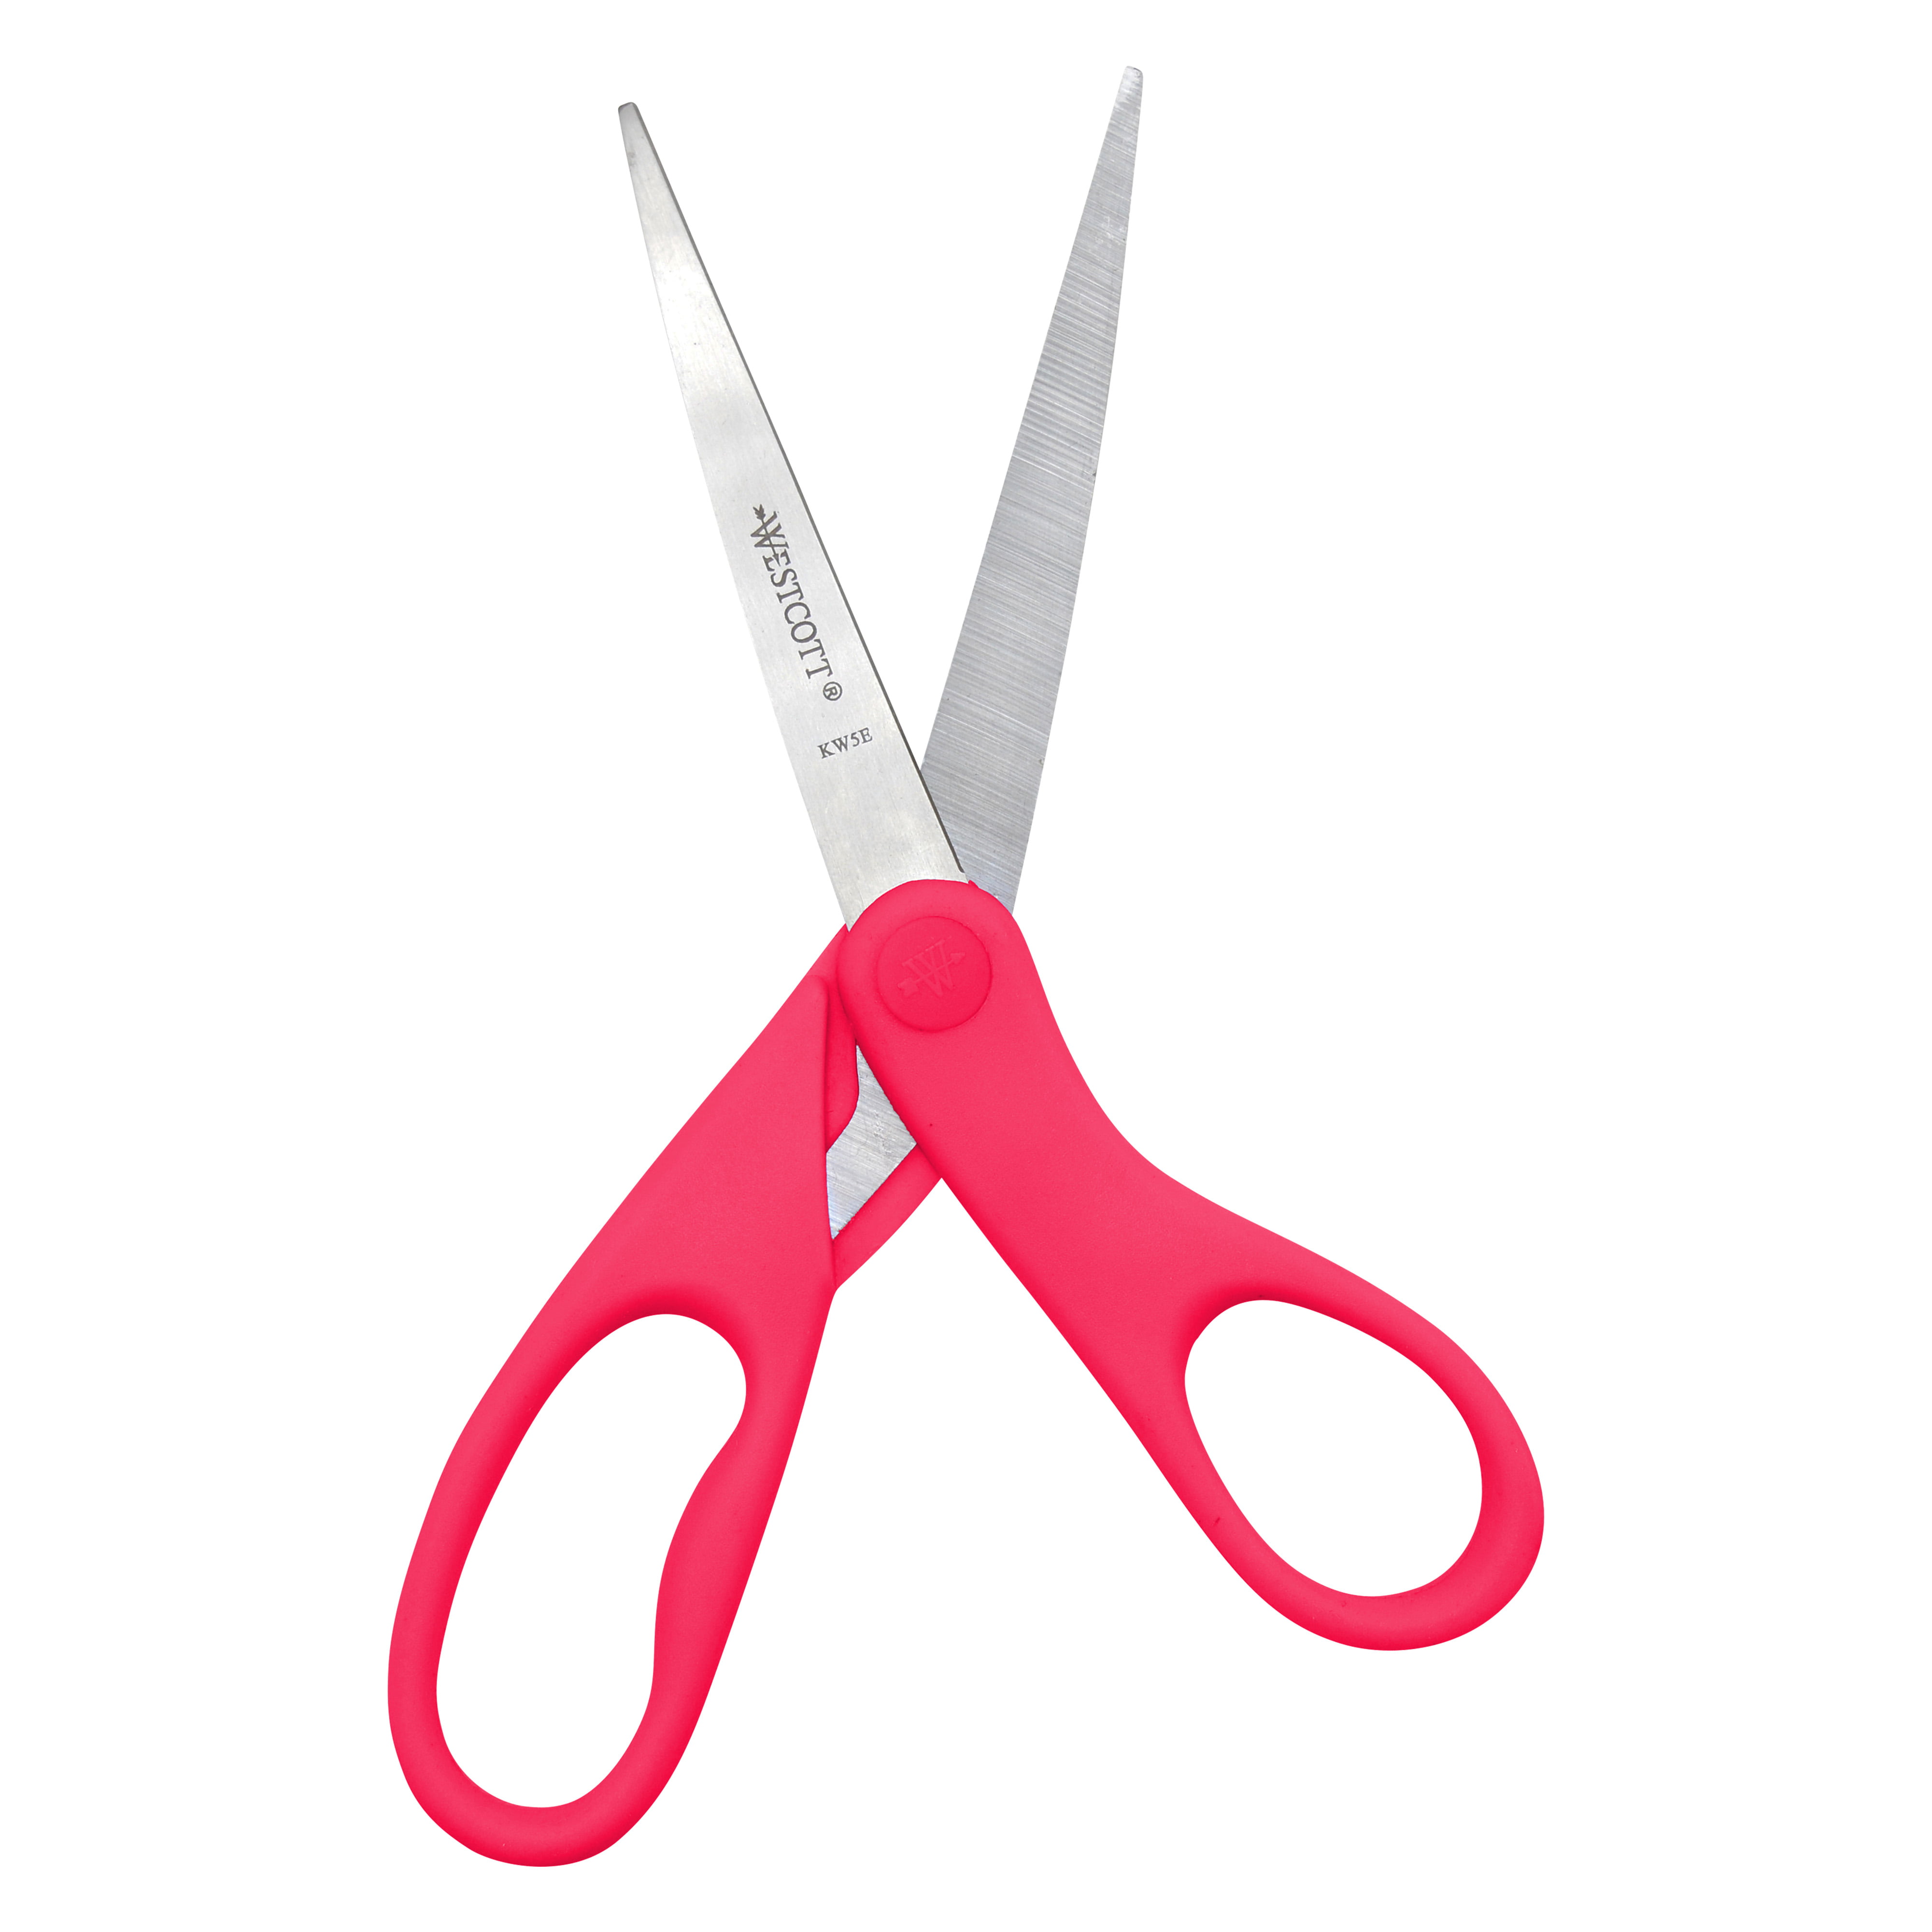 Needlework Detail Scissors Westcott Fine Point Pink 10cm 4 Stainless Steel  Blades Small Sewing, Embroidery, Knitting Scissors 